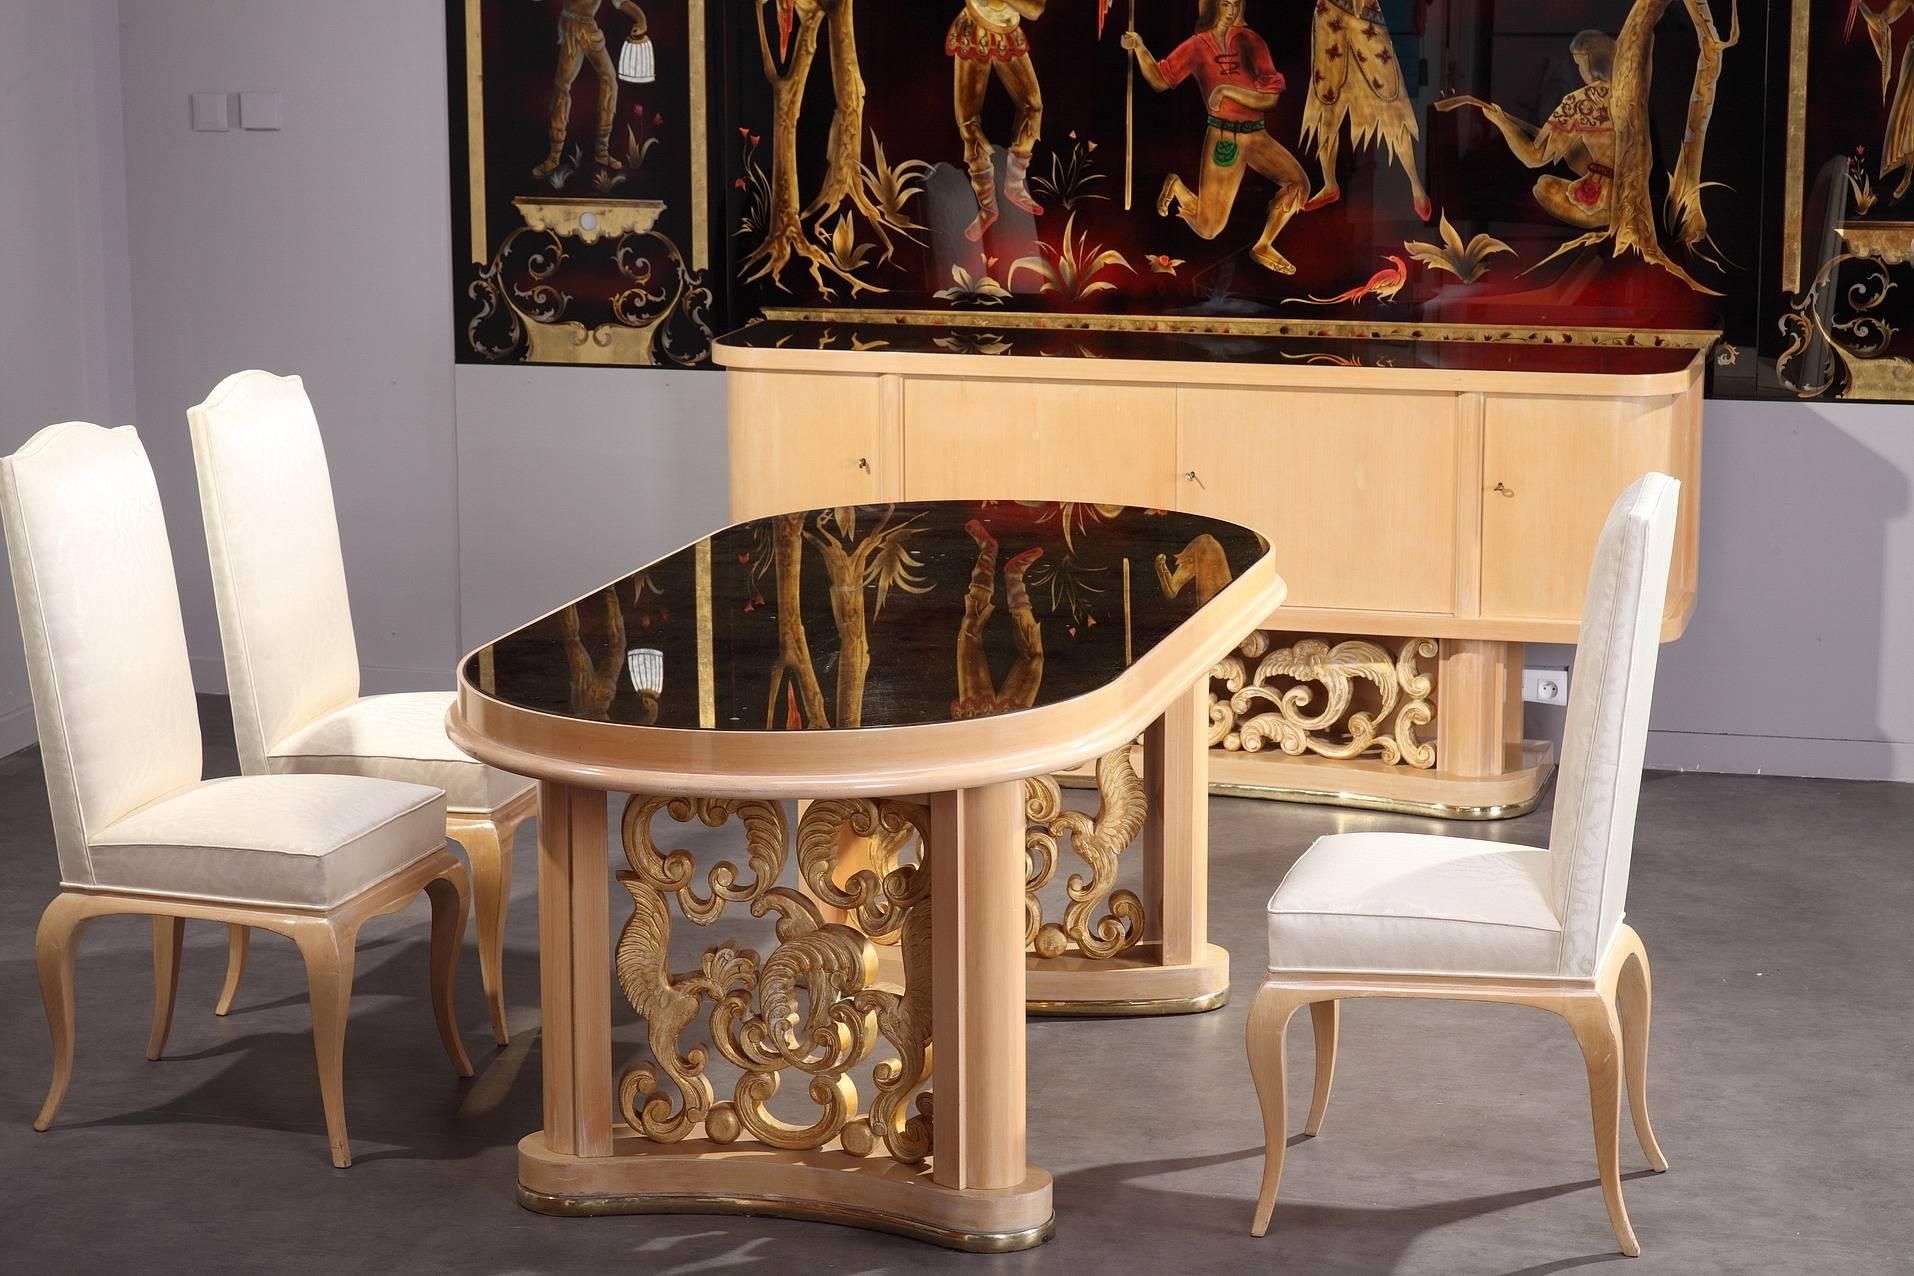 Dining room set in sycamore and sycamore veneer composed of a table, four chairs, two armchairs and a sideboard.

The table with oval tray is set on two curved gilded legs, decorated with birds and foliated scrolls. The chairs and armchairs are